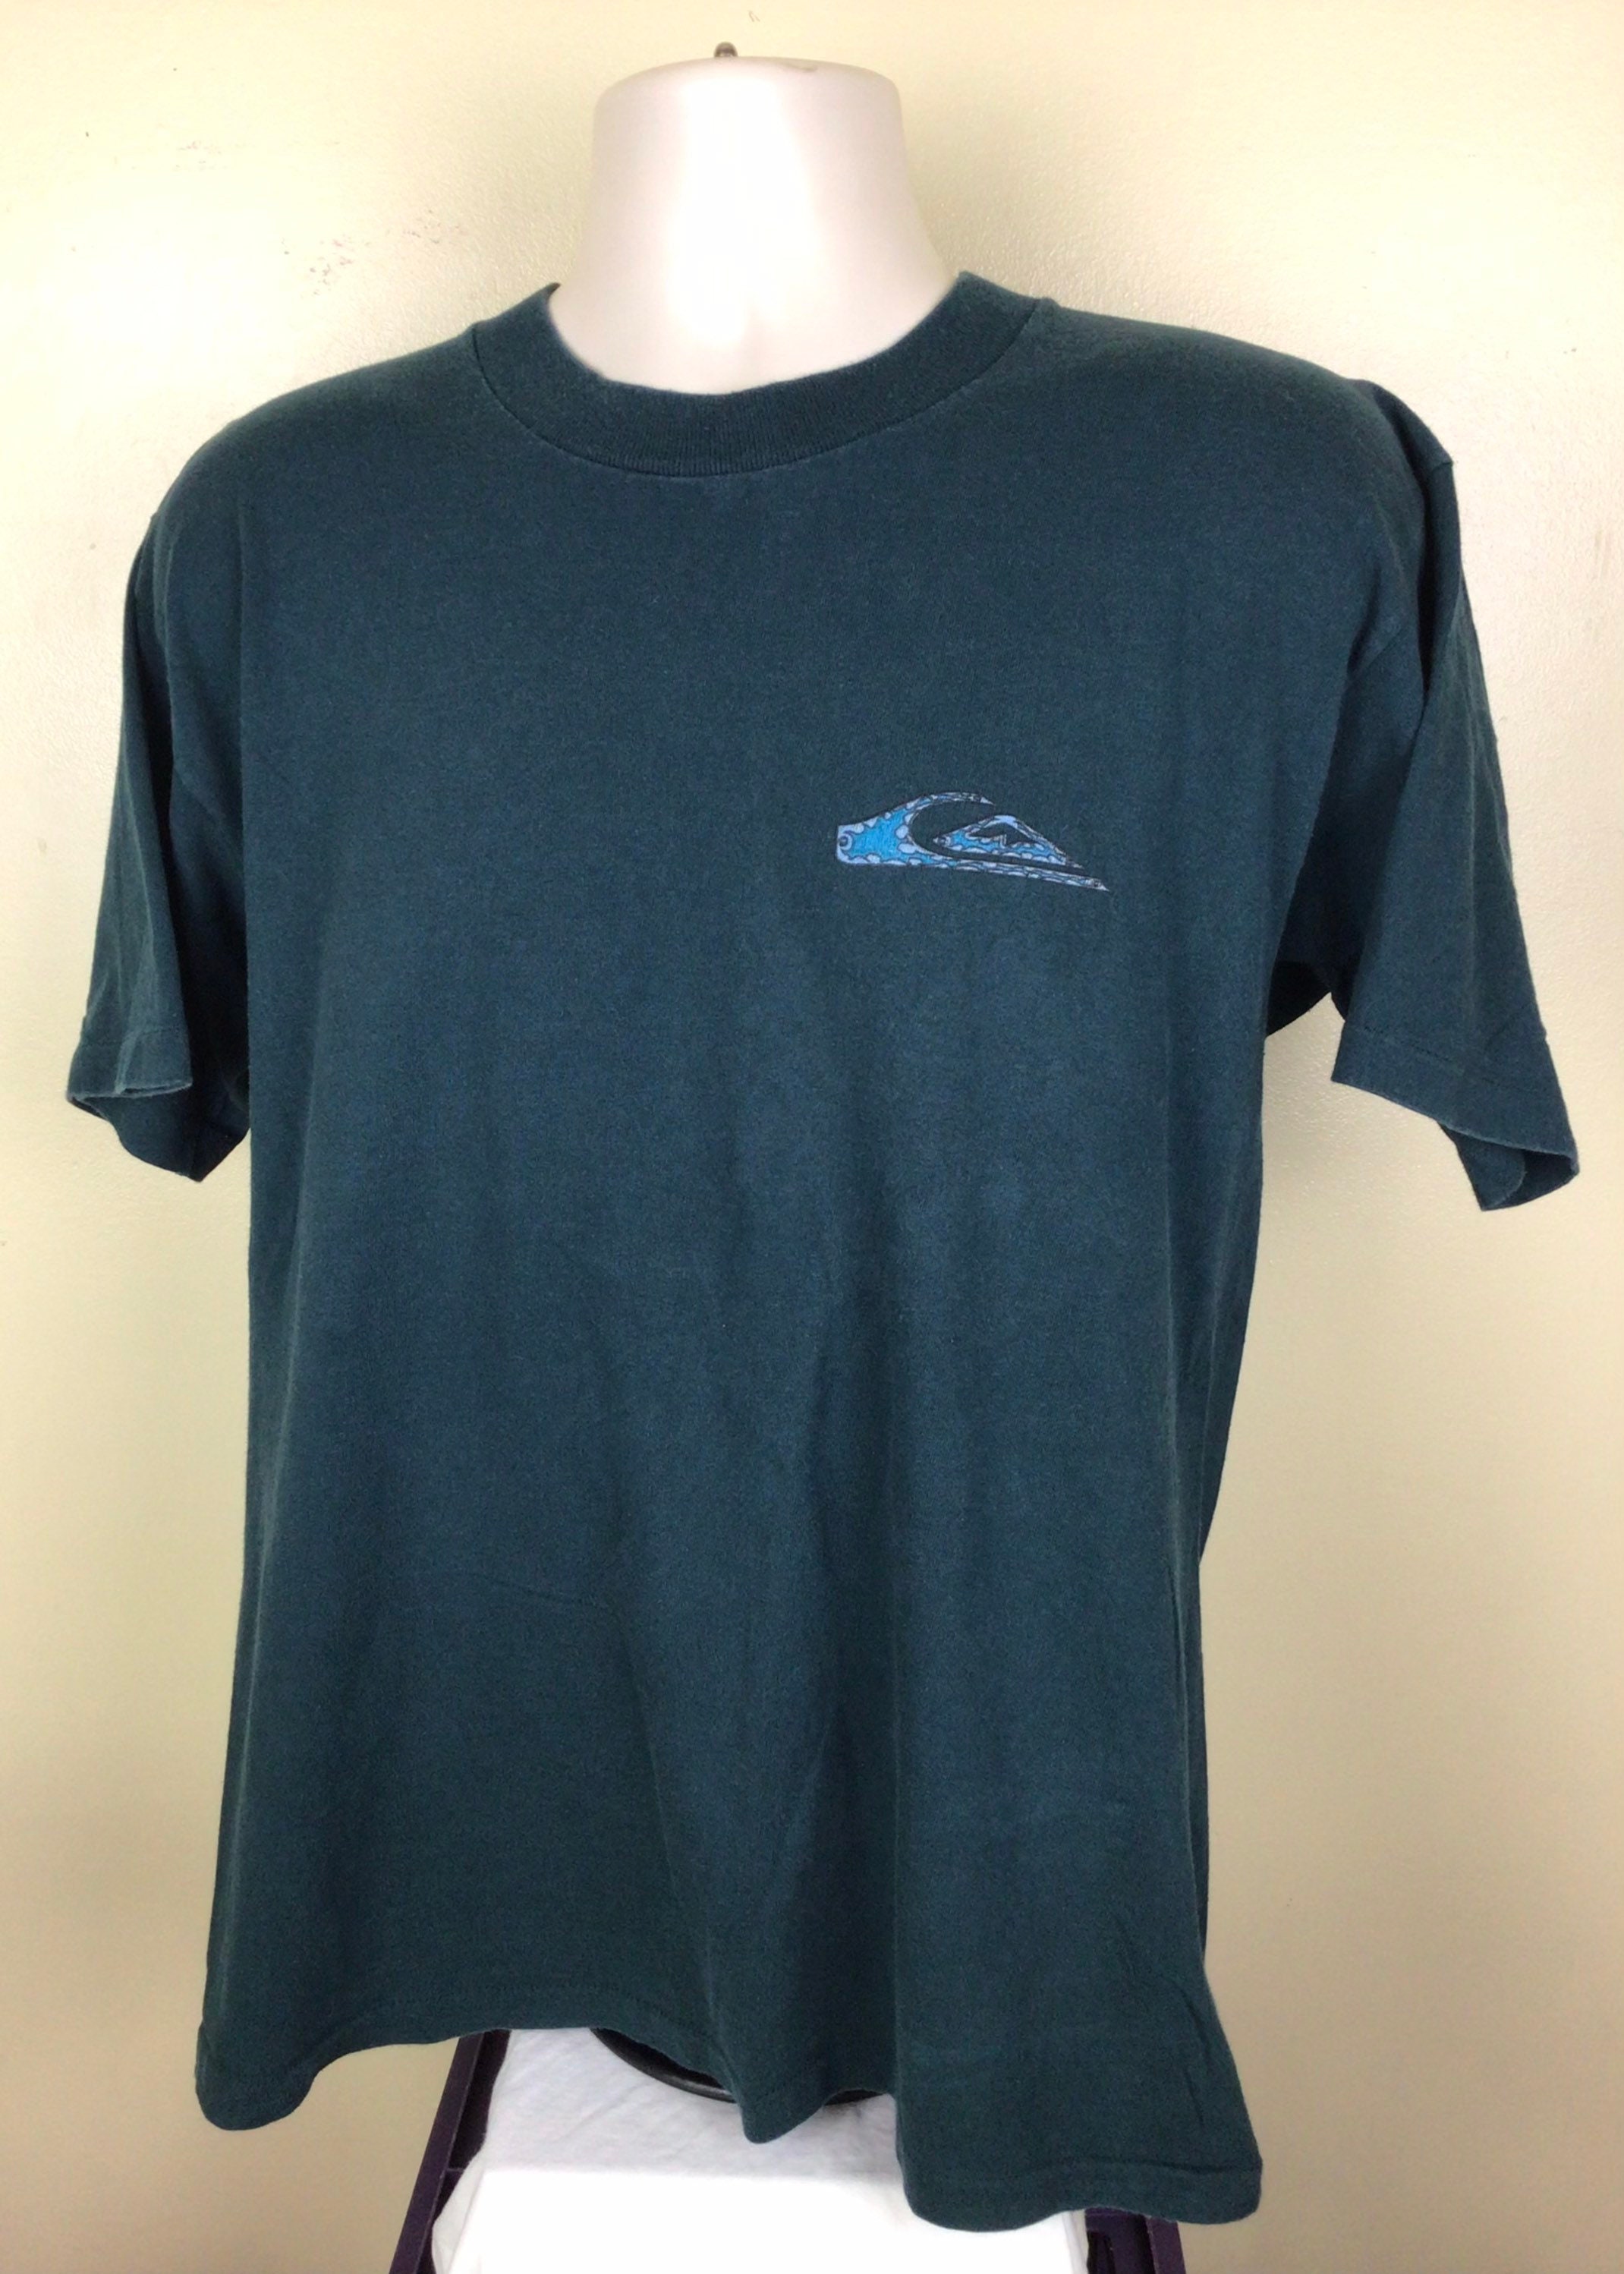 Vtg 90s Quiksilver T-shirt Teal Green L Surf Skate Brand Single Stitch Made  in USA - Etsy Finland